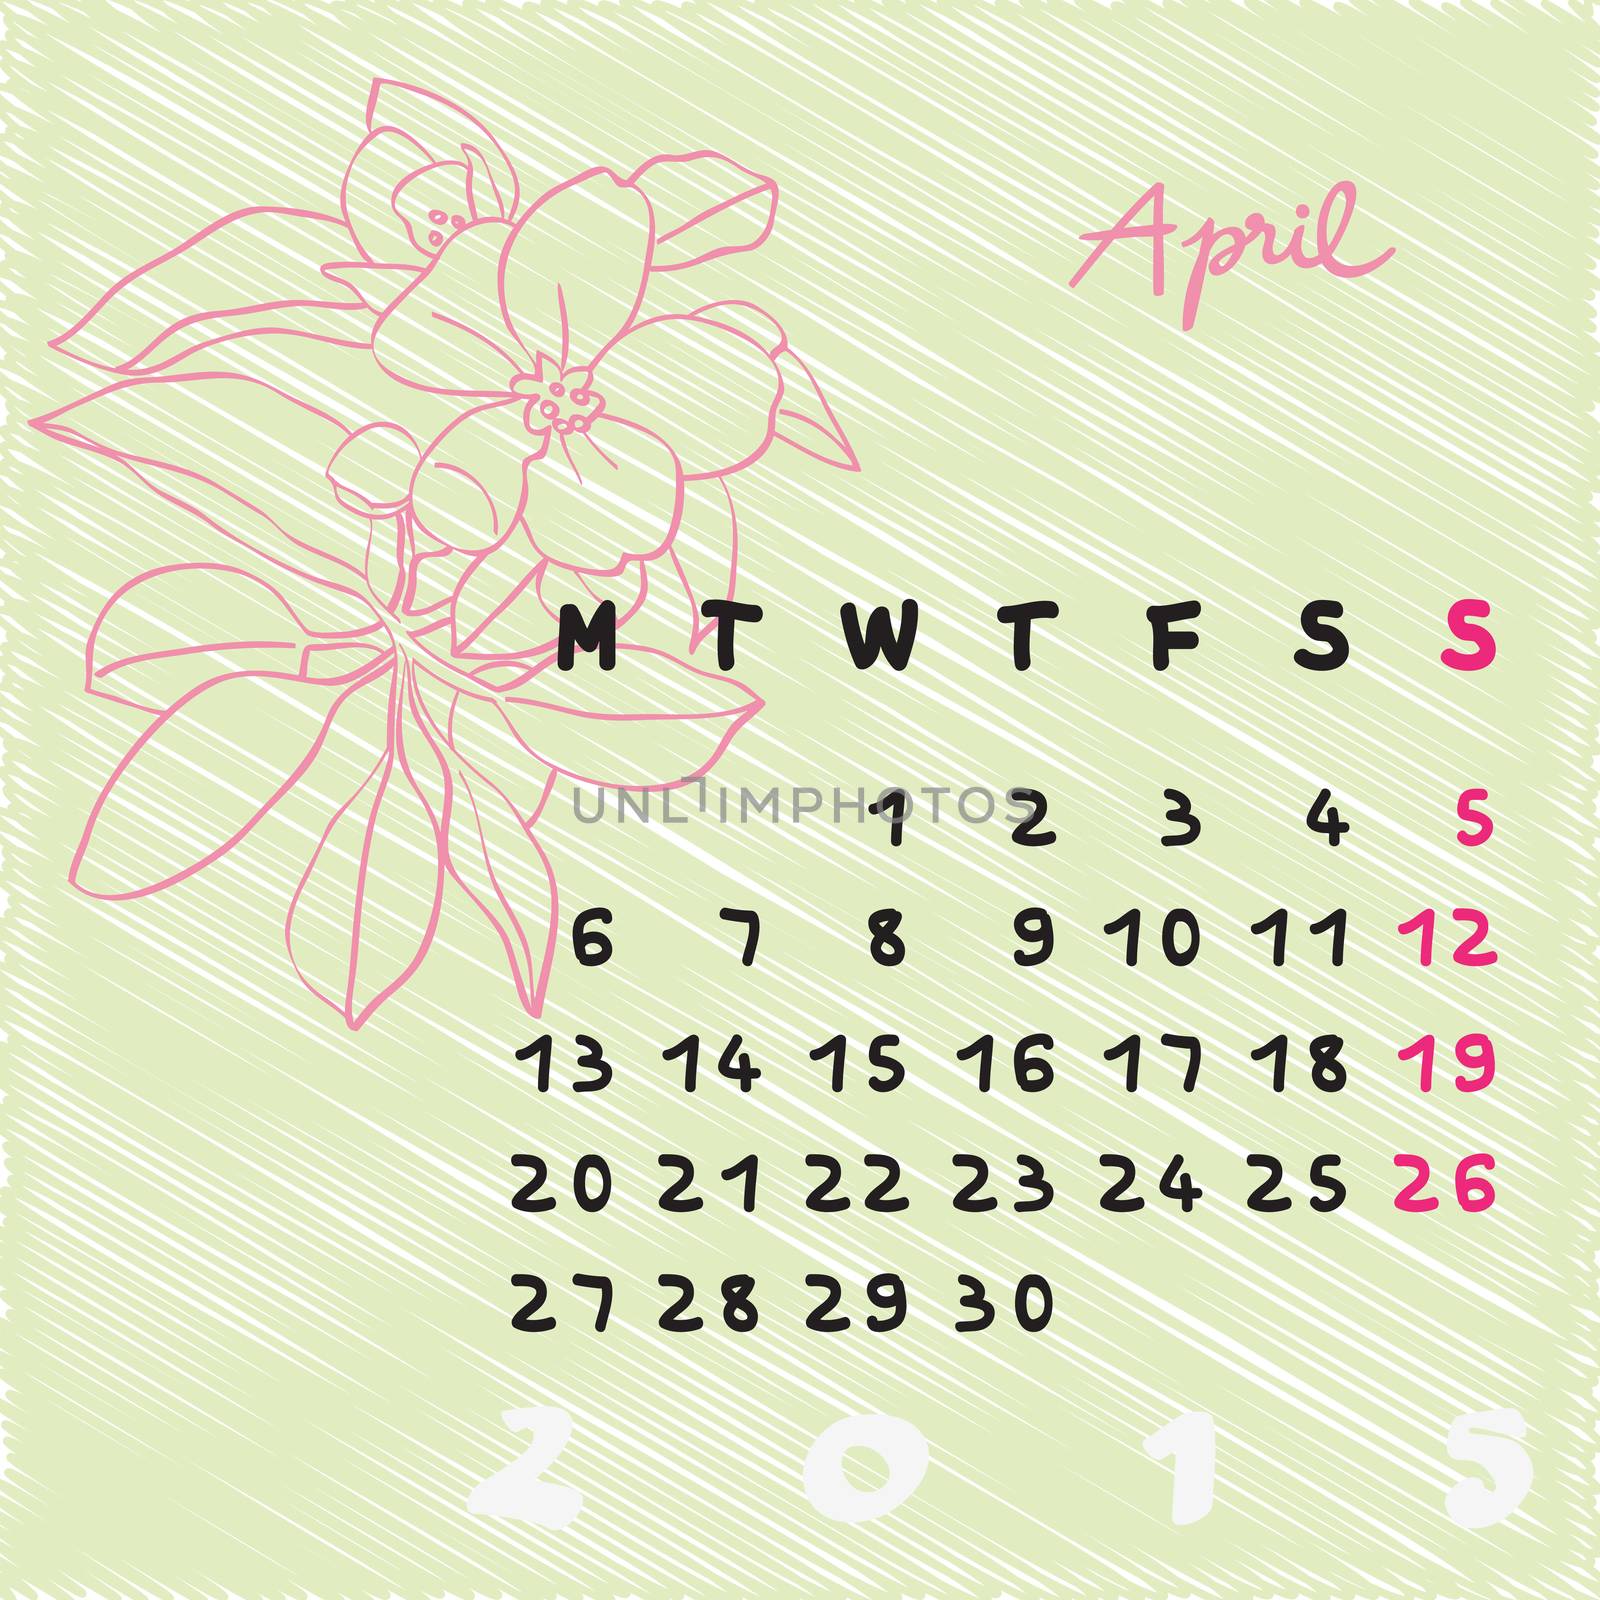 Calendar 2015, graphic illustration of April month calendar with original hand drawn text and apple tree flower